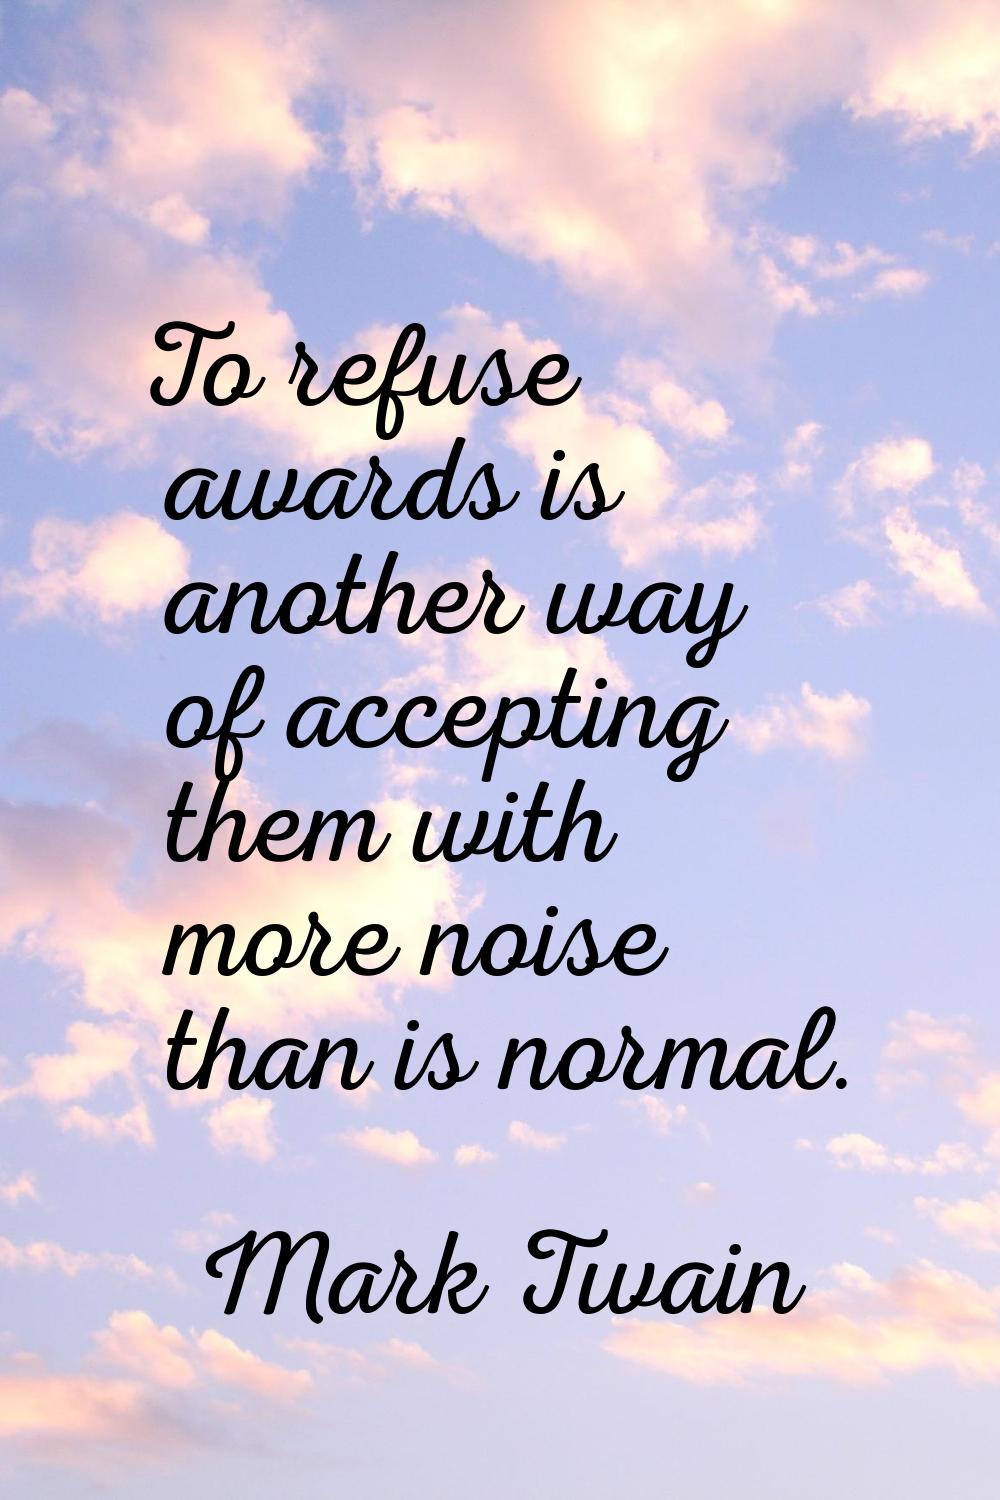 To refuse awards is another way of accepting them with more noise than is normal.